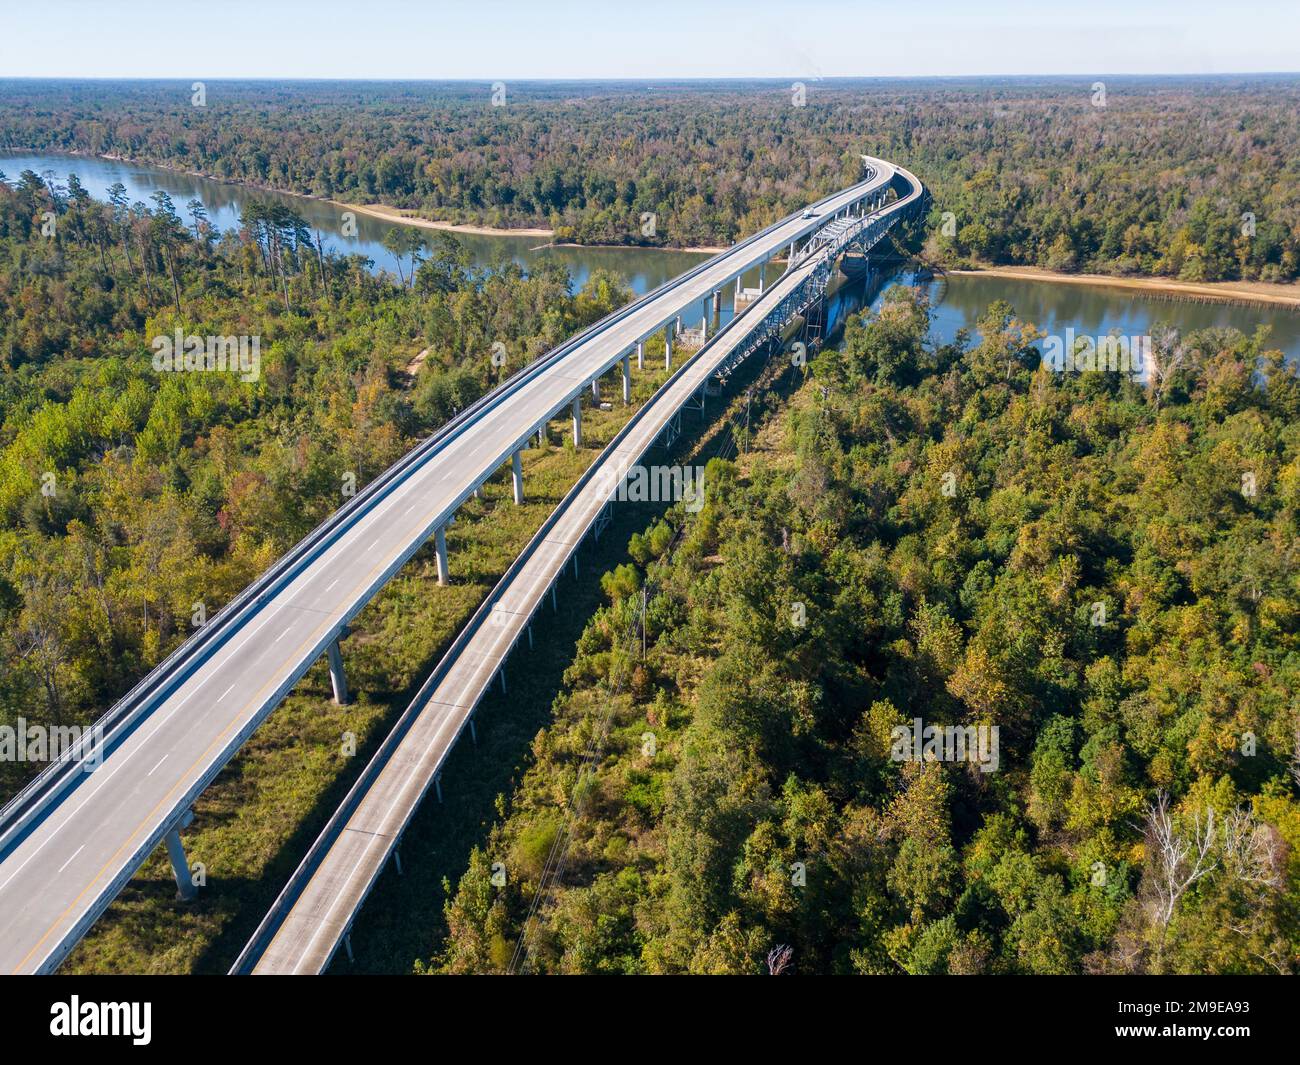 An aerial view of the Trammell bridge over the Apalachicola River in Florida, the United States Stock Photo